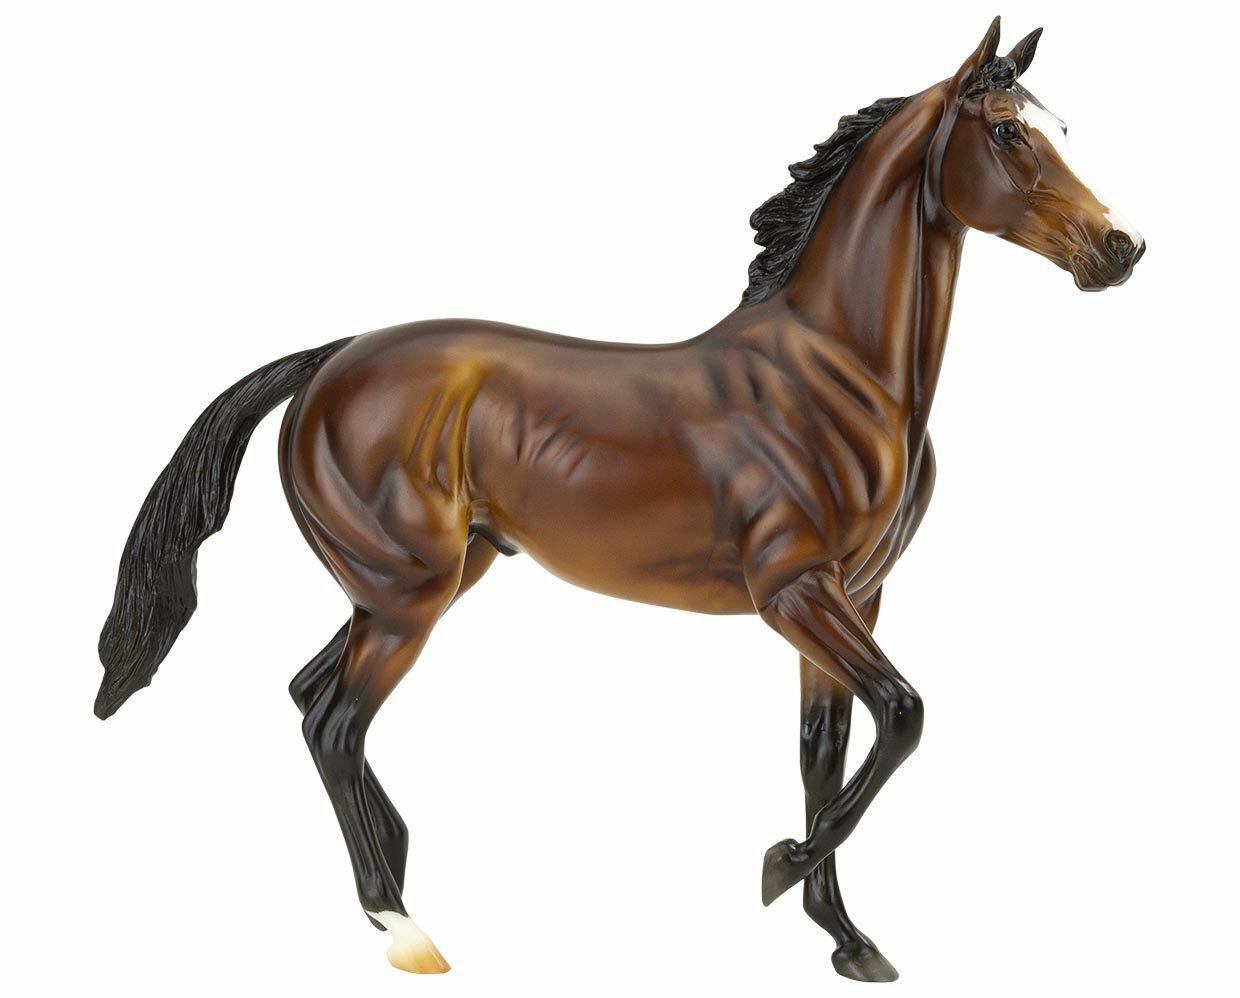 Breyer Horses Traditional Size Thoroughbred Tiz the Law Model Horse #1848